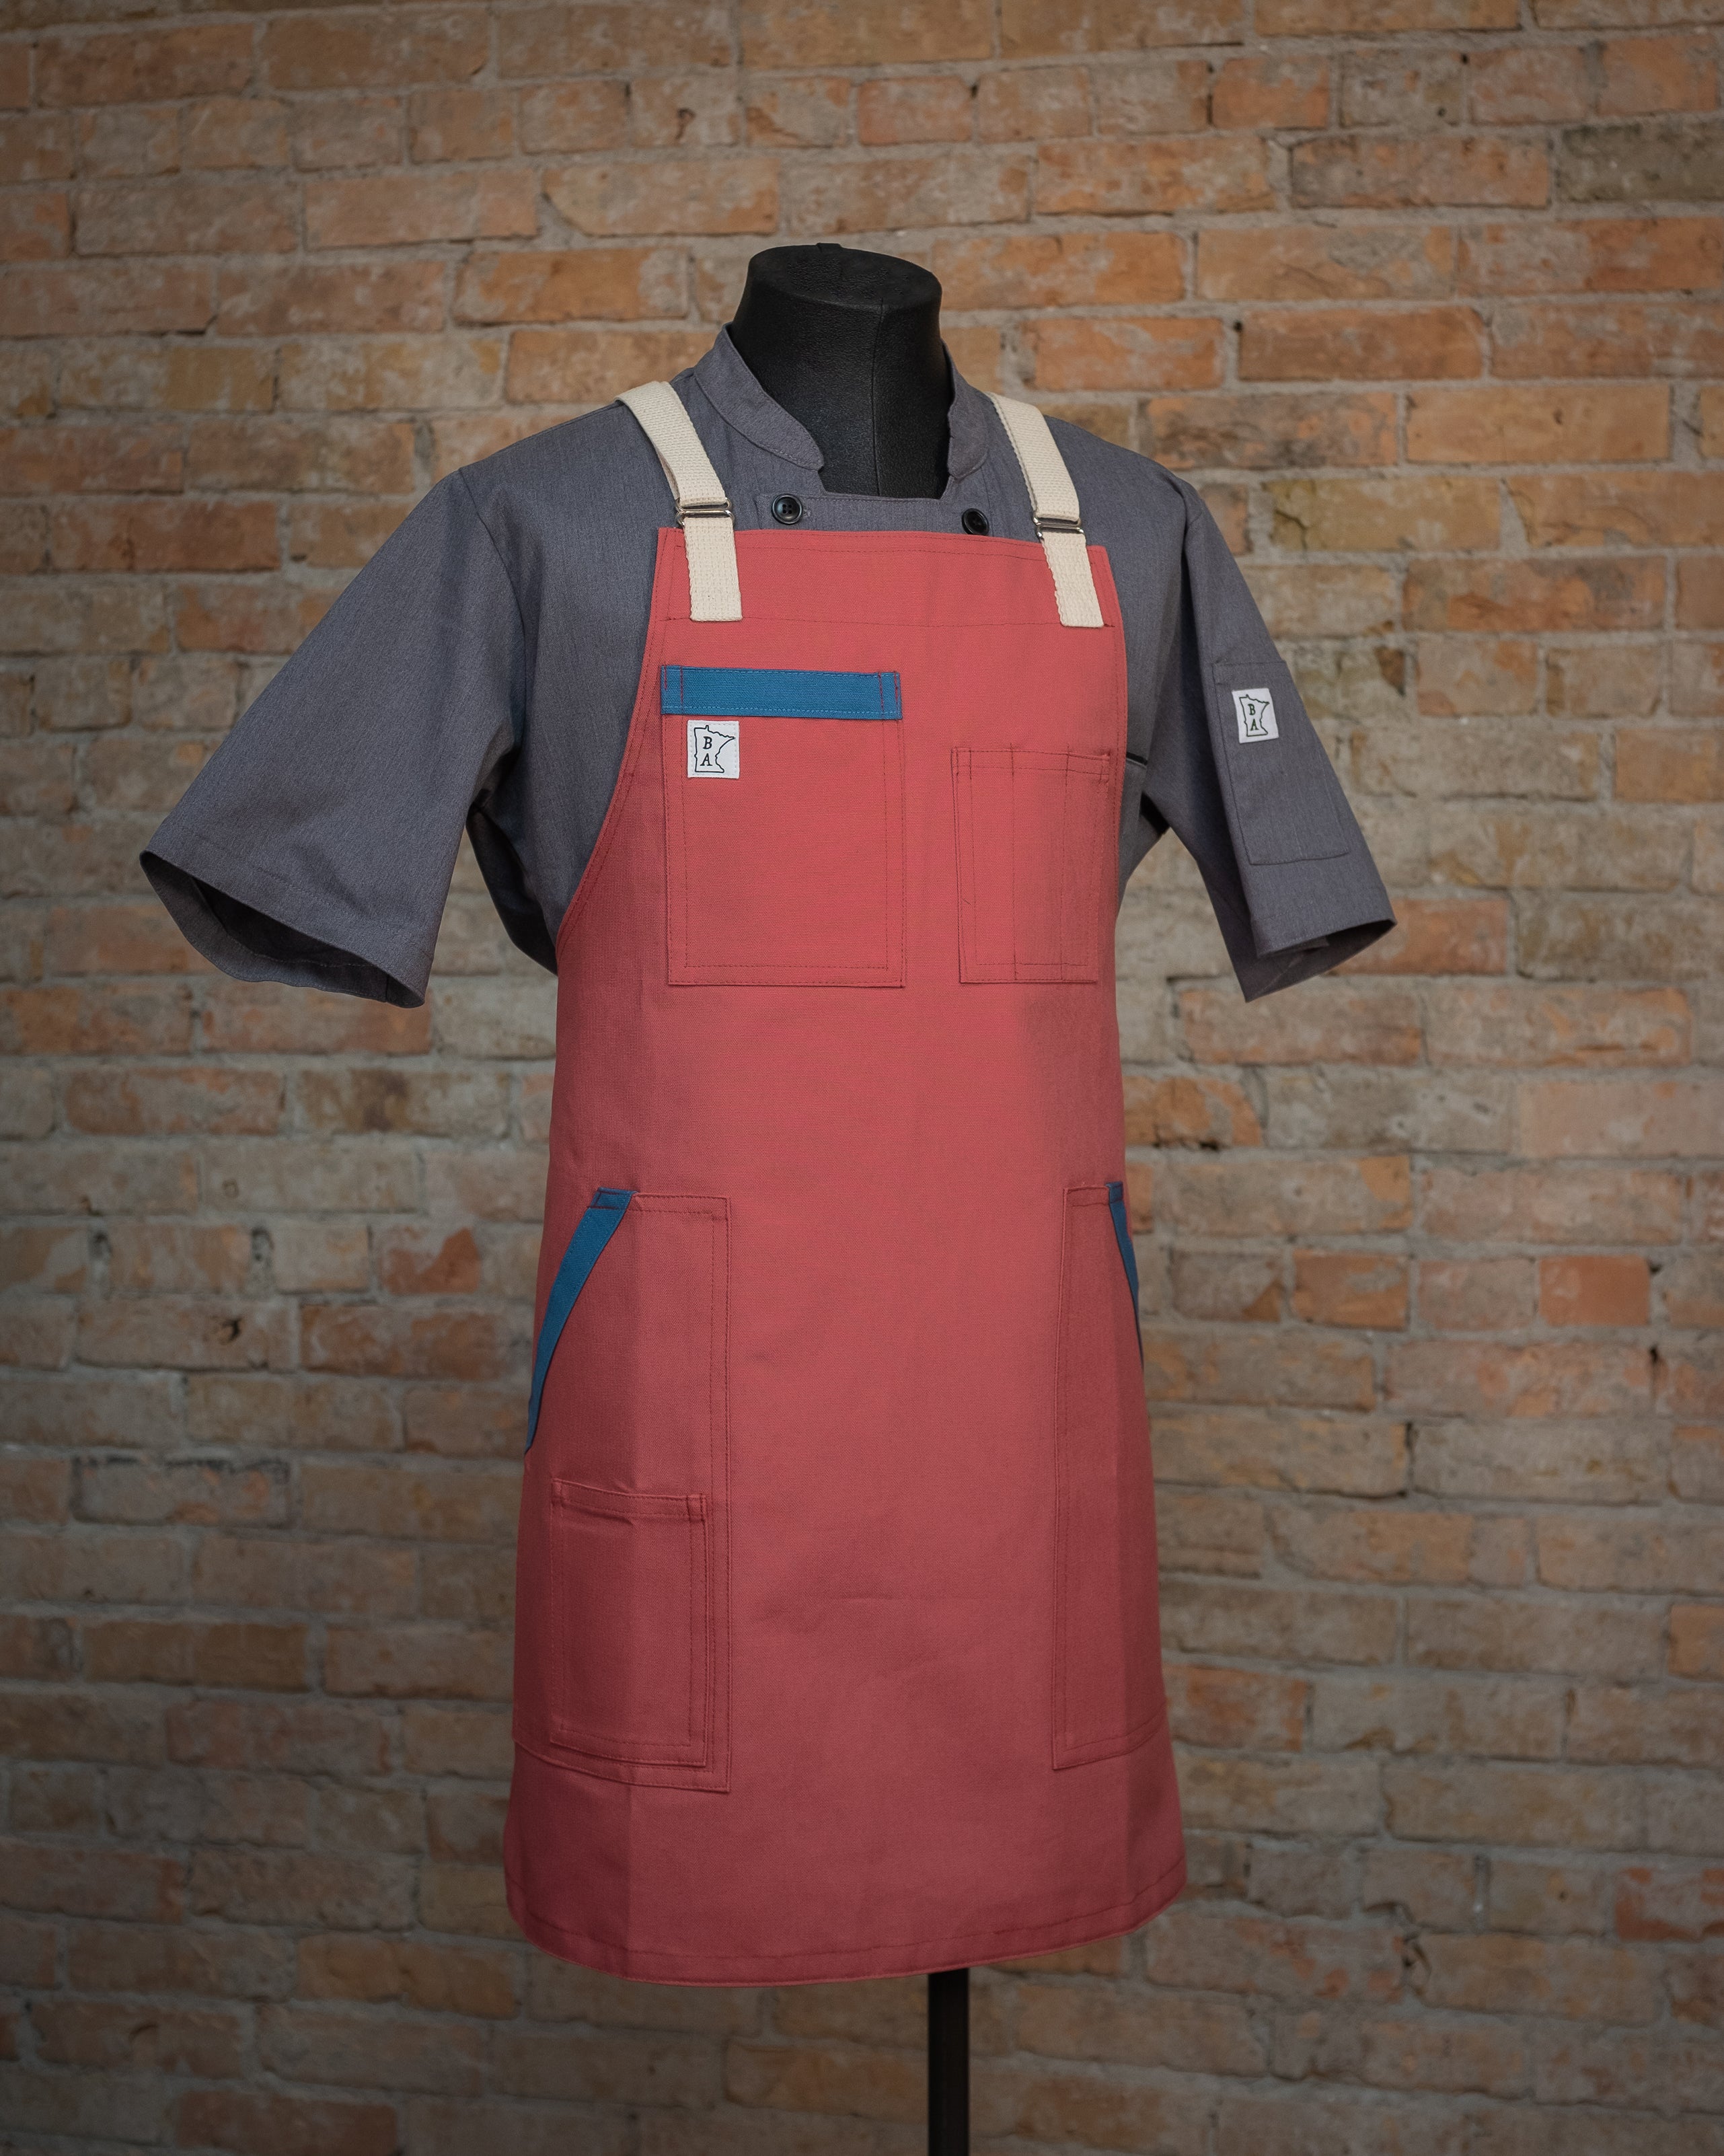 The duck cloth apron design Sockeye displayed on a mannequin over a gray chef coat. Both the chef coat and the apron were designed  and produced by Craftmade Aprons, Minnesota.